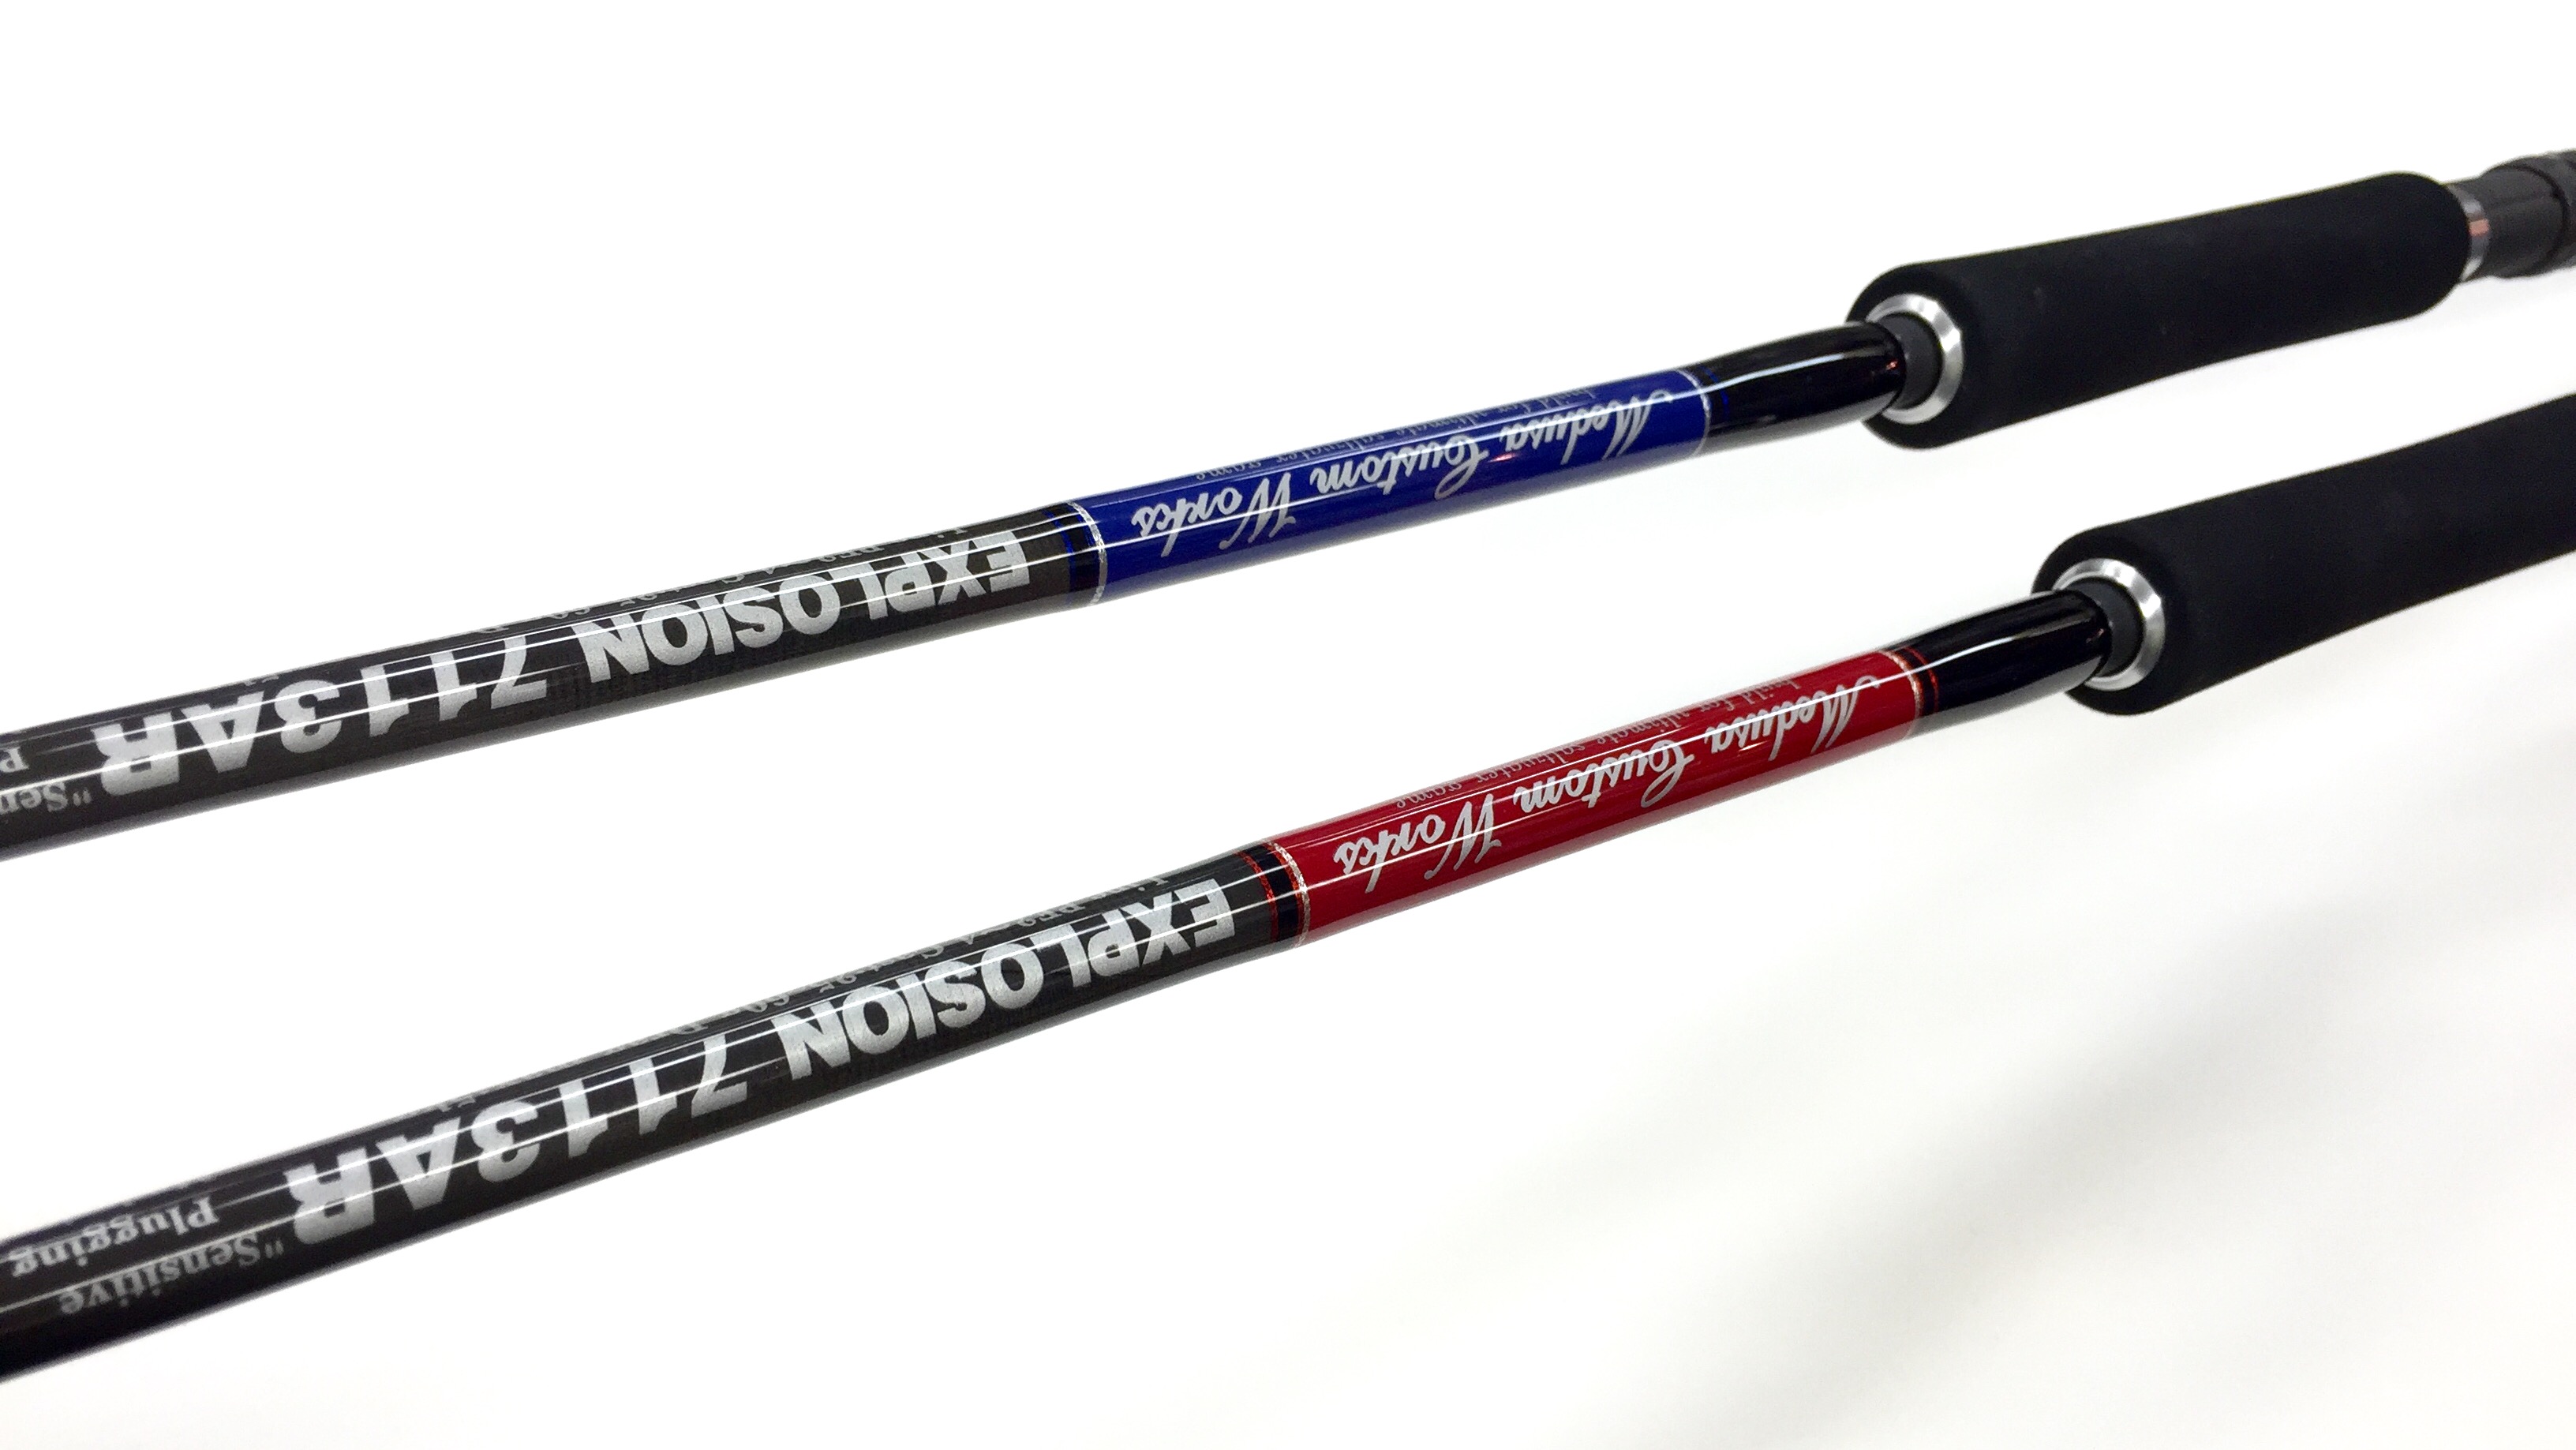 MC works' 【EXPLOSION 7113AR SPECIAL MODEL】 – サンスイ渋谷店 Part 